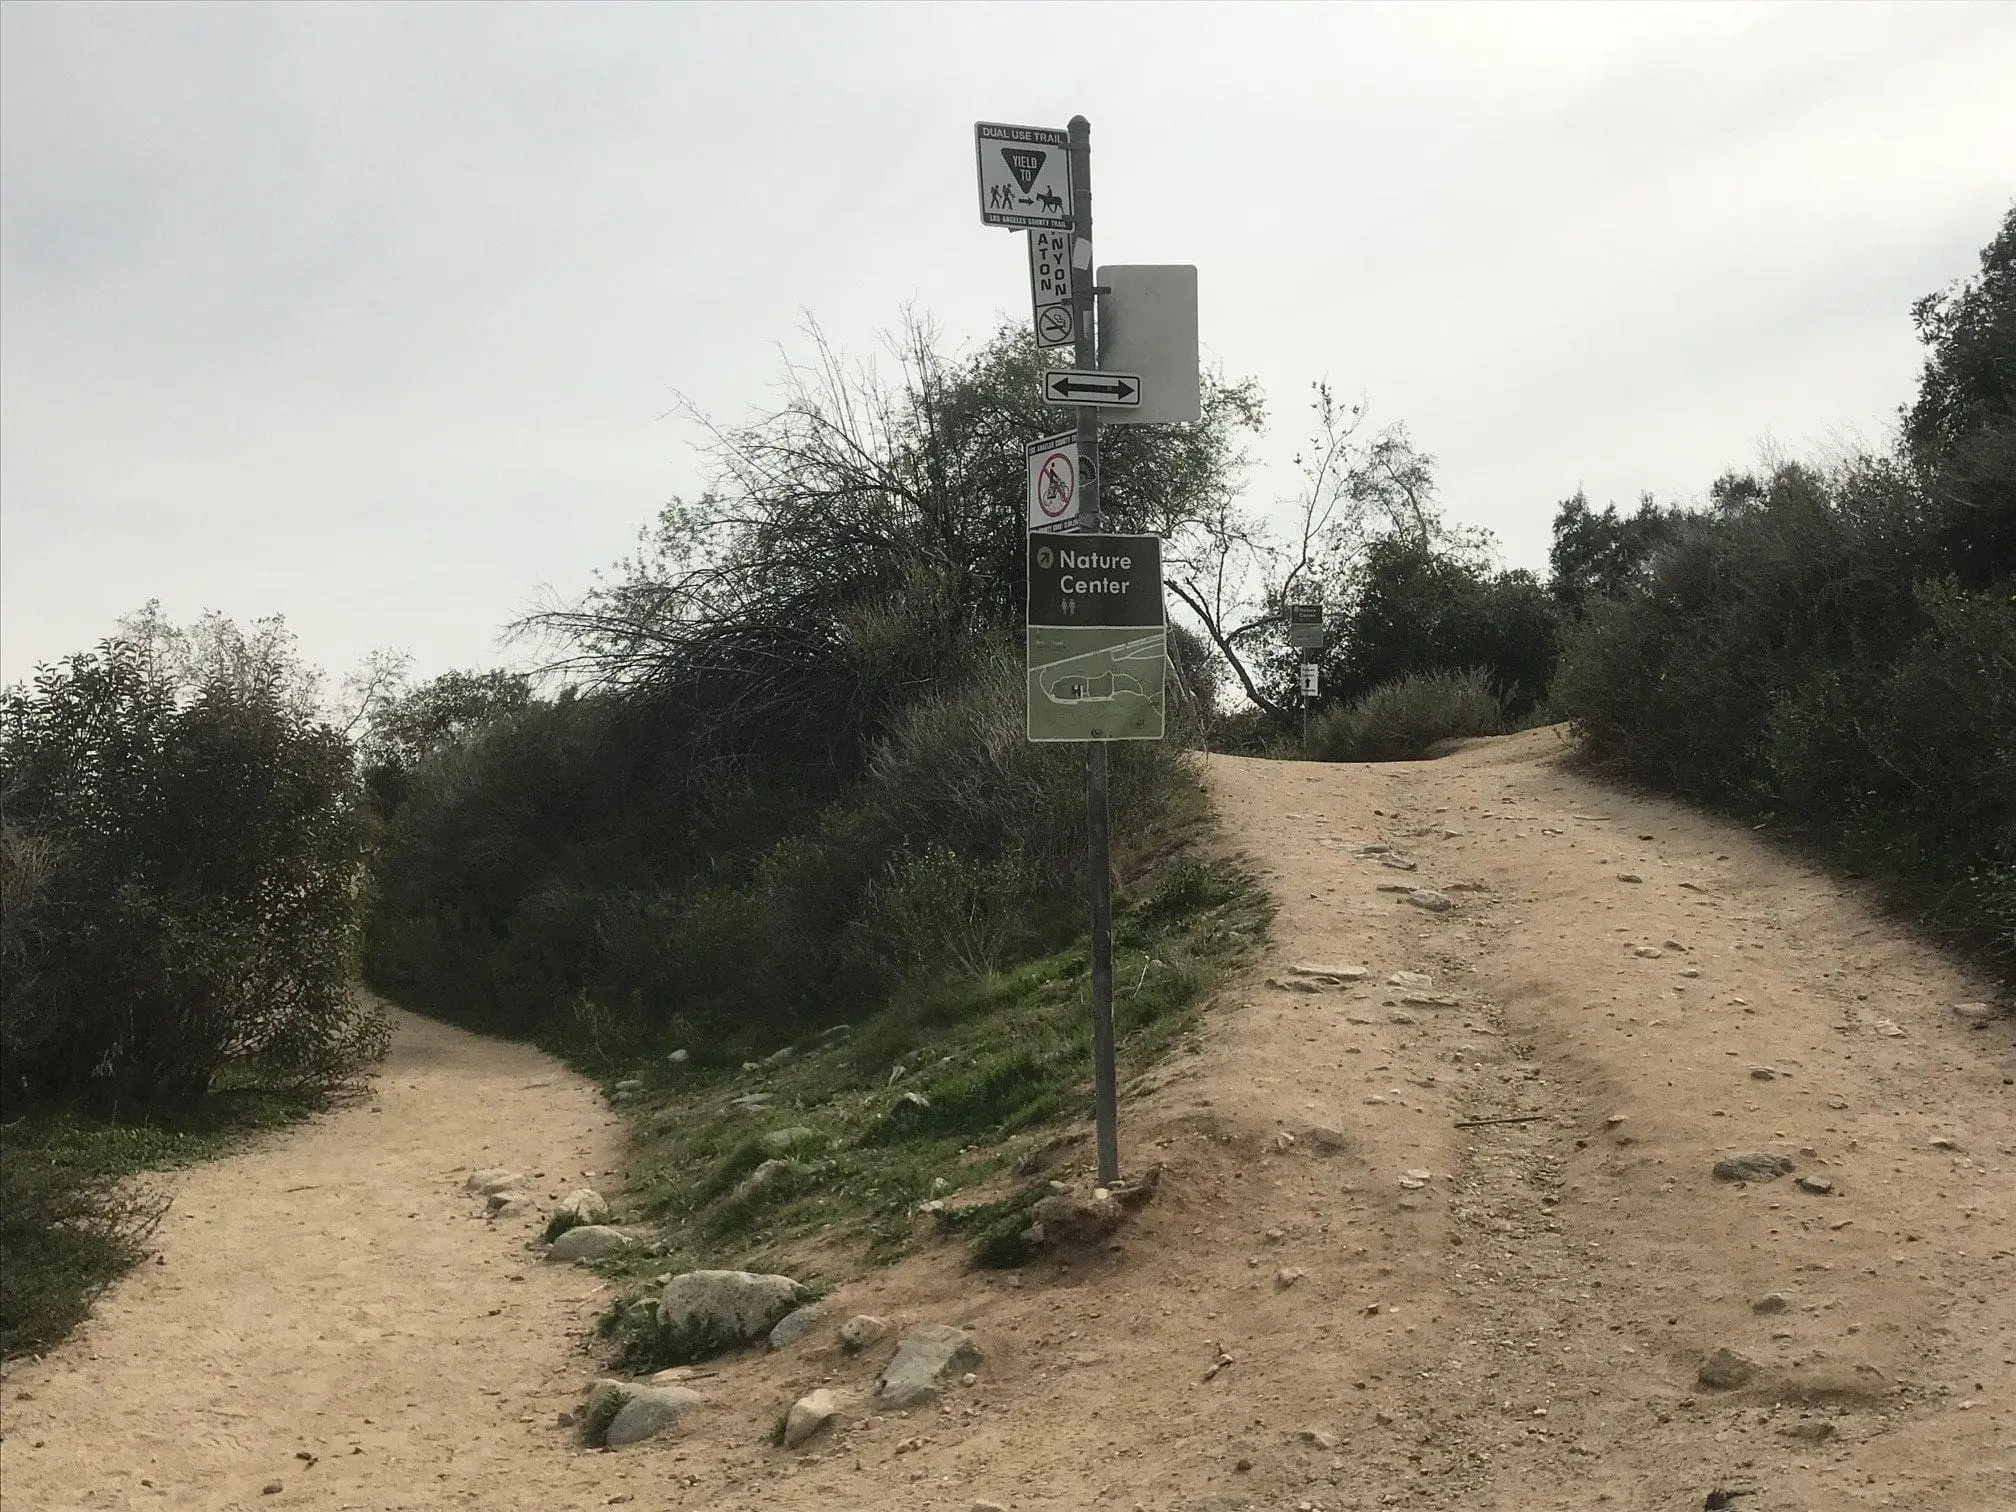 eaton canyon nature center trail split and sign to nature center.